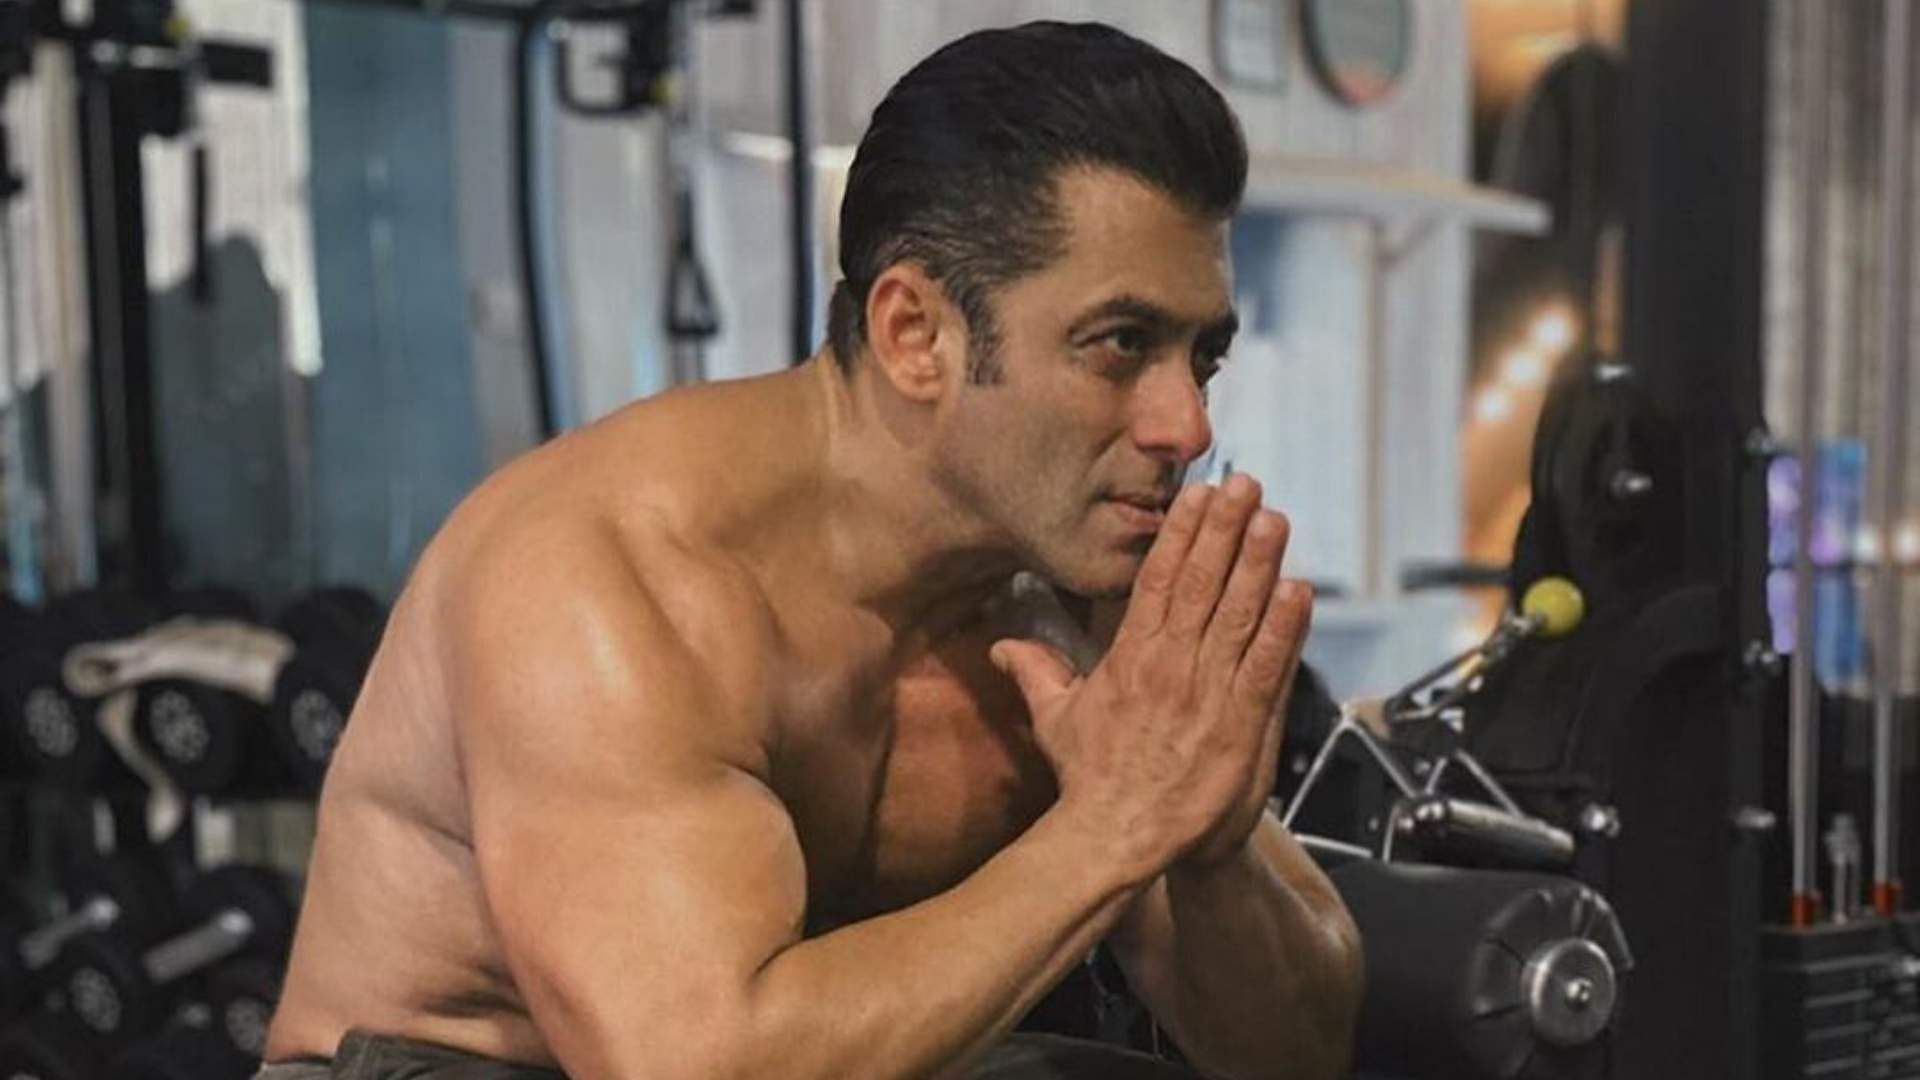 Salman Khan puts out a video asking people to take the pandemic seriously and not risk lives.